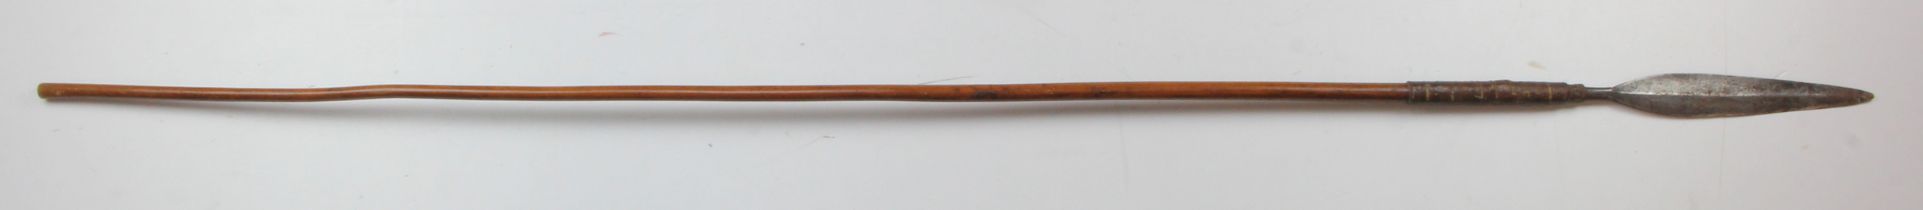 Zulu throwing Spear, wooden shaft 39", leaf shaped spear head, bound to shaft with leather (Buyer